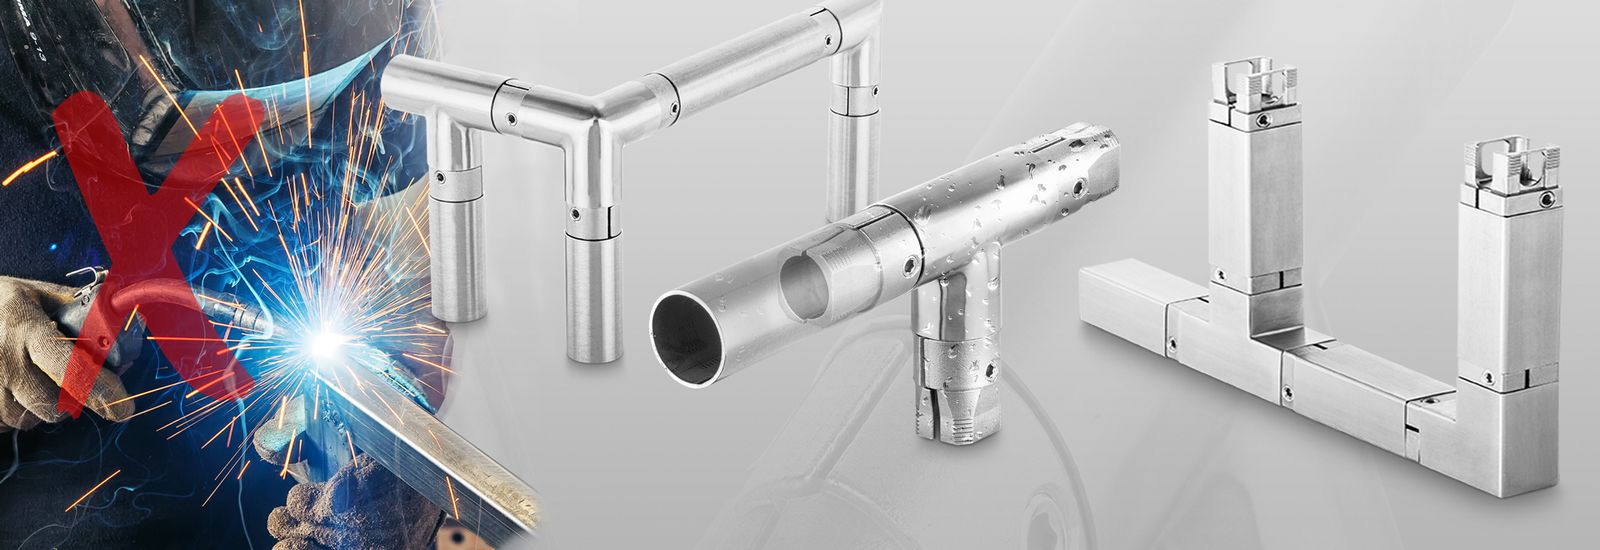 Title image shows the stainless steel assembly system